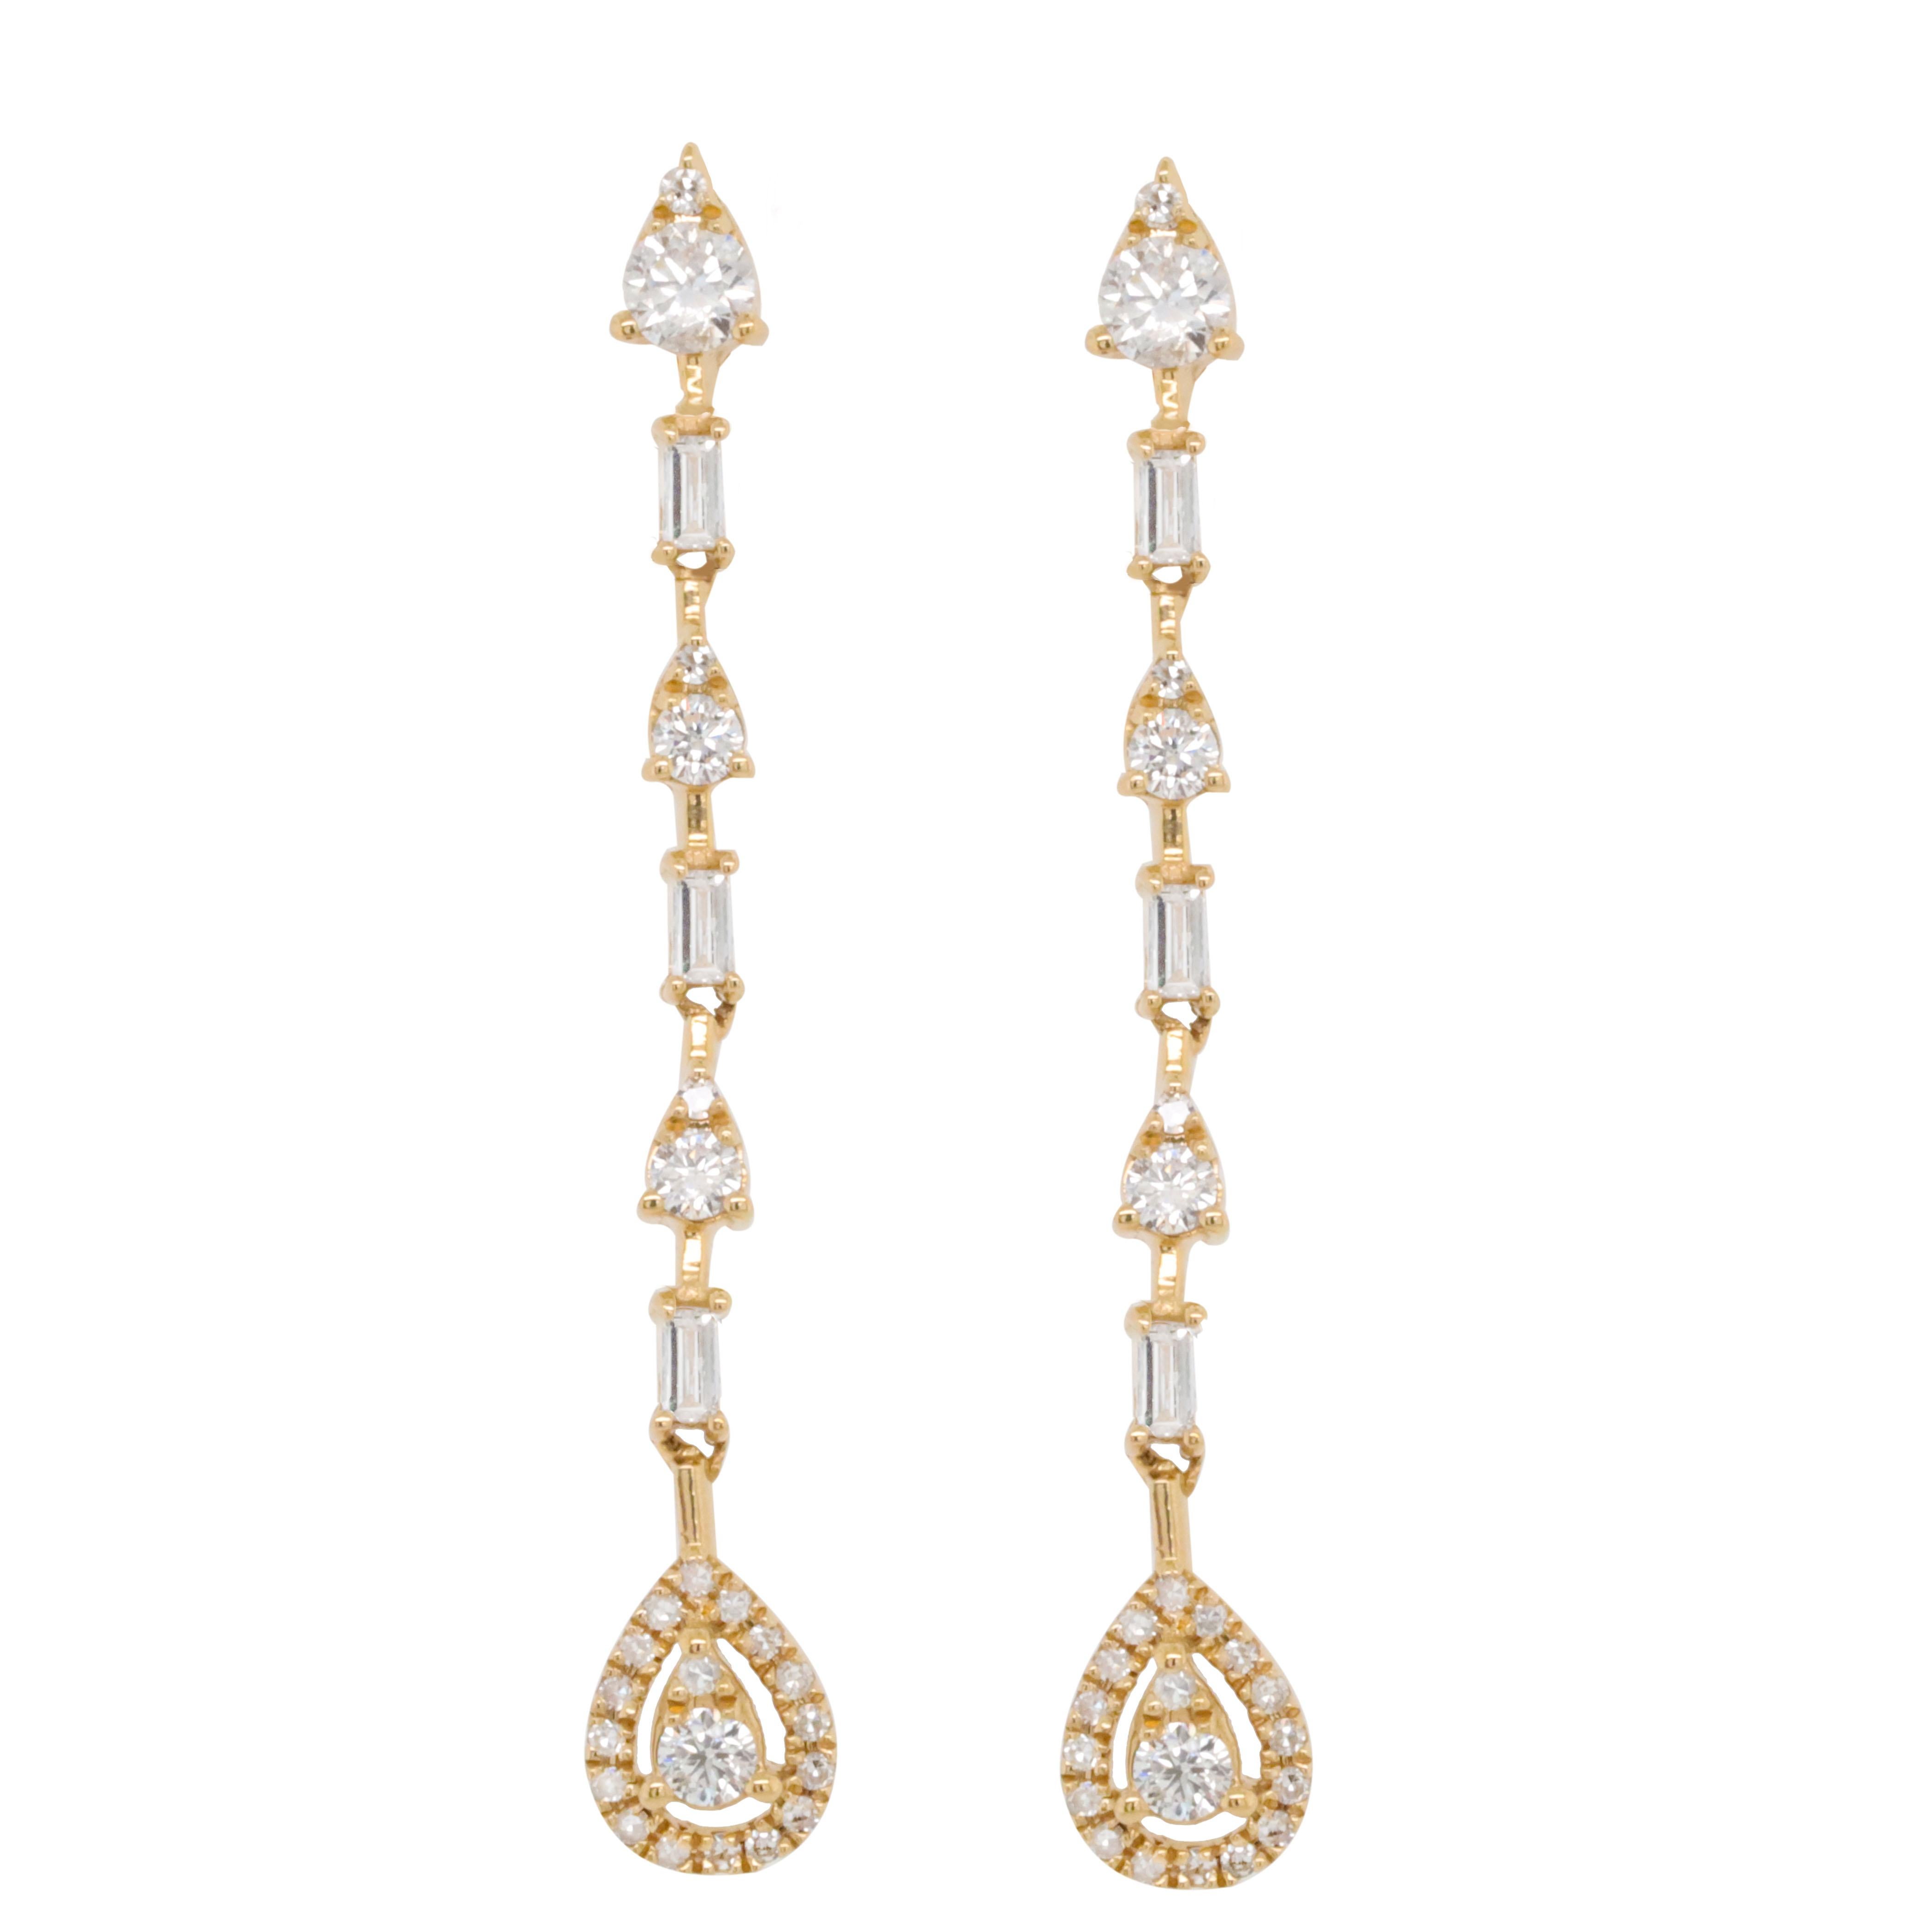 14K Rose Gold Multicolor Sapphire And Diamond Earrings featuring 0.76 Carats T.W. of Sapphires and 0.32 Carat T.W. Diamonds

Underline your look with this sharp 14K Rose Gold Diamond and Sapphire Earrings. High quality Diamonds and sapphires. This